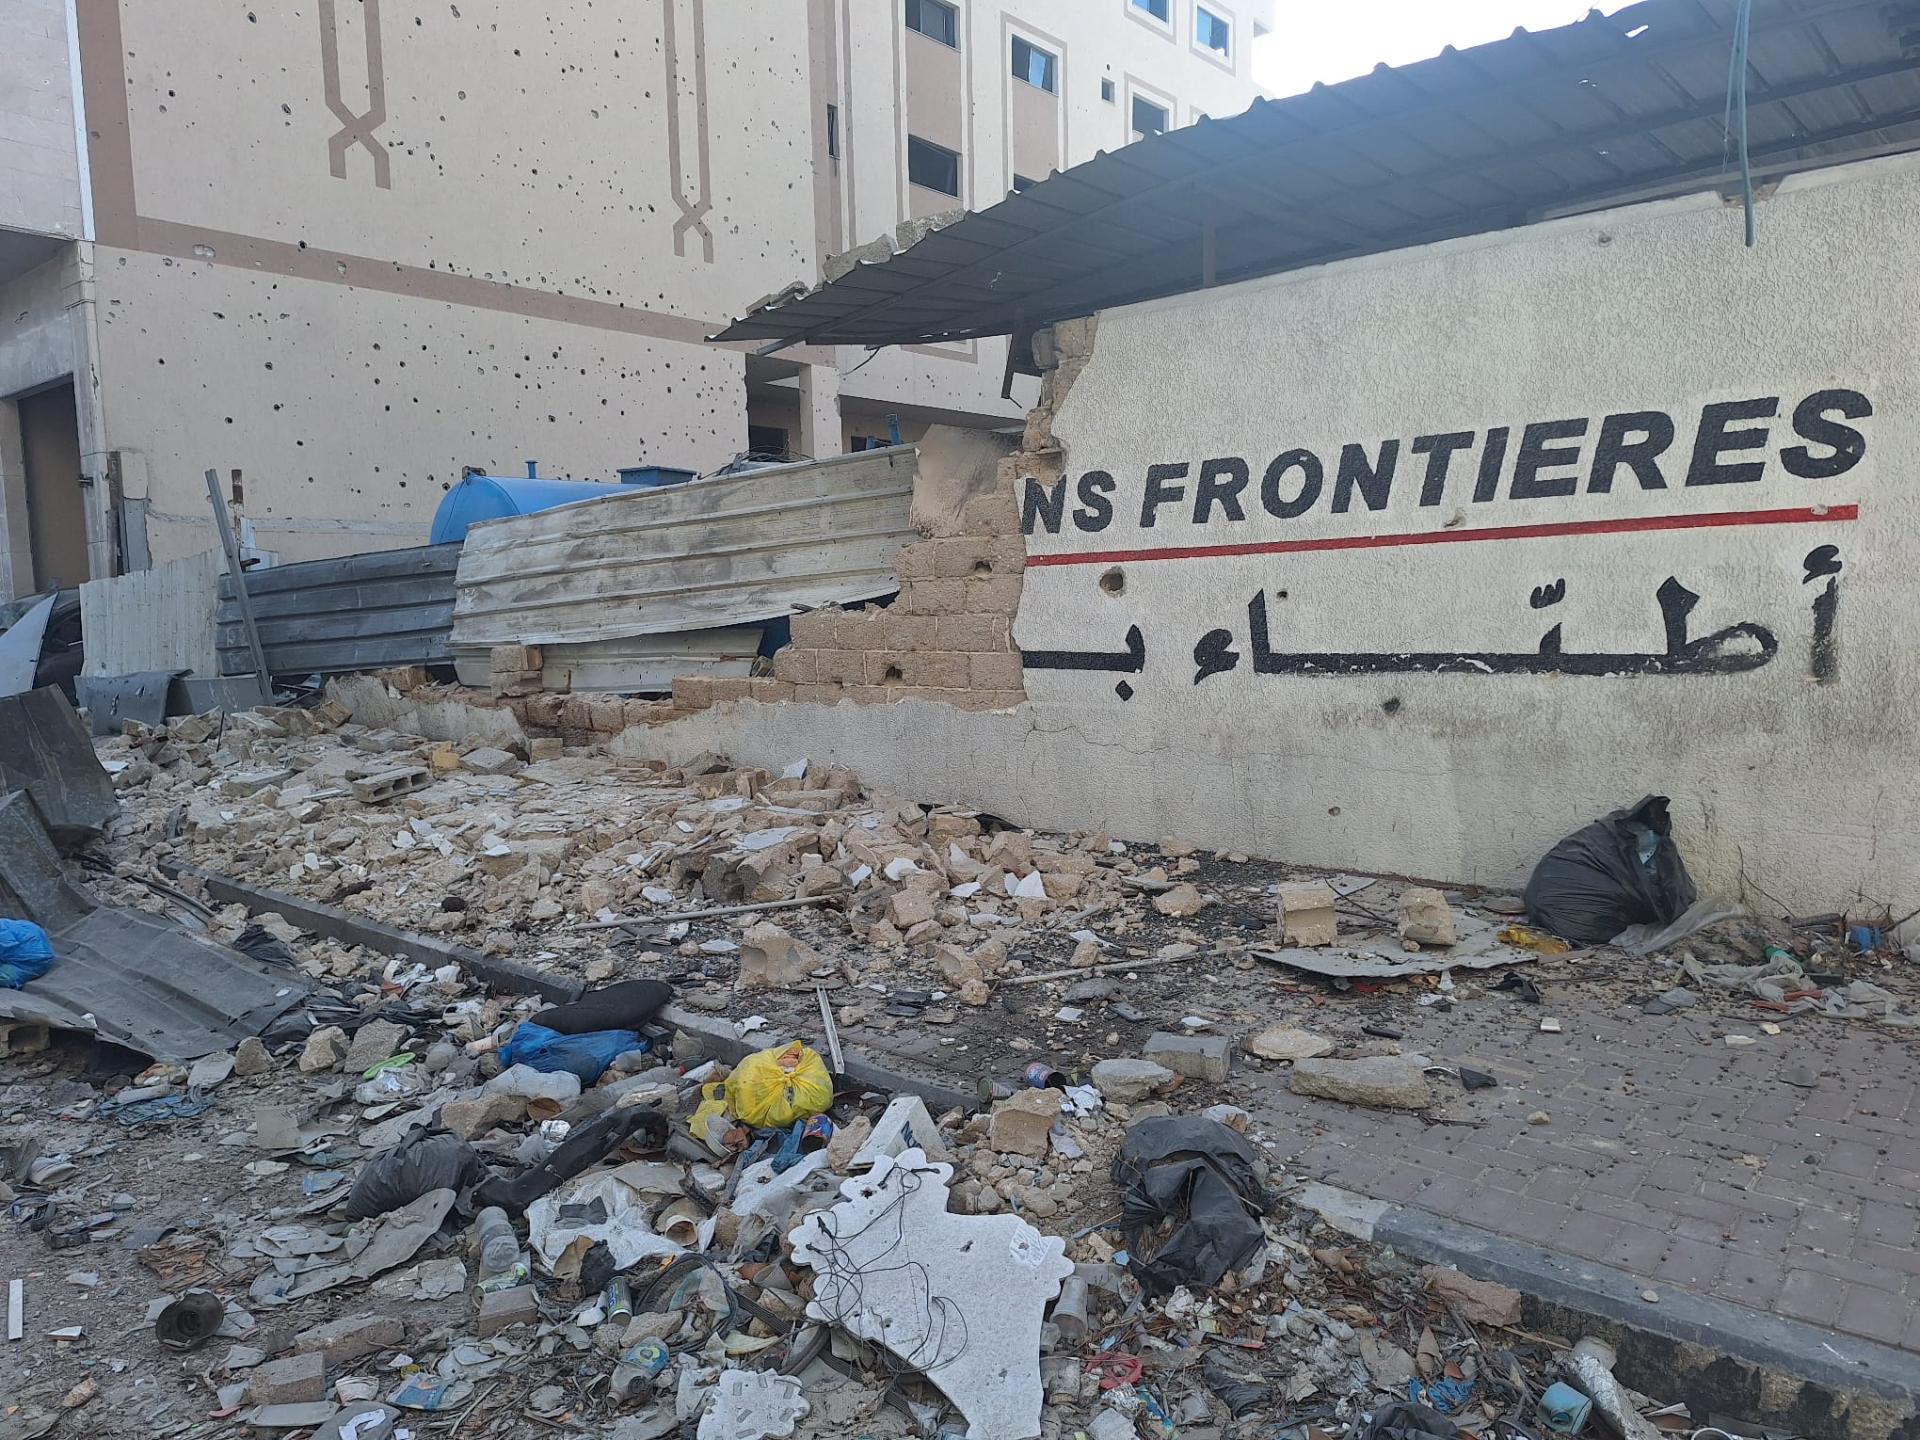 Image of a damaged wall in the MSF office in Gaza due to Israeli bombings.